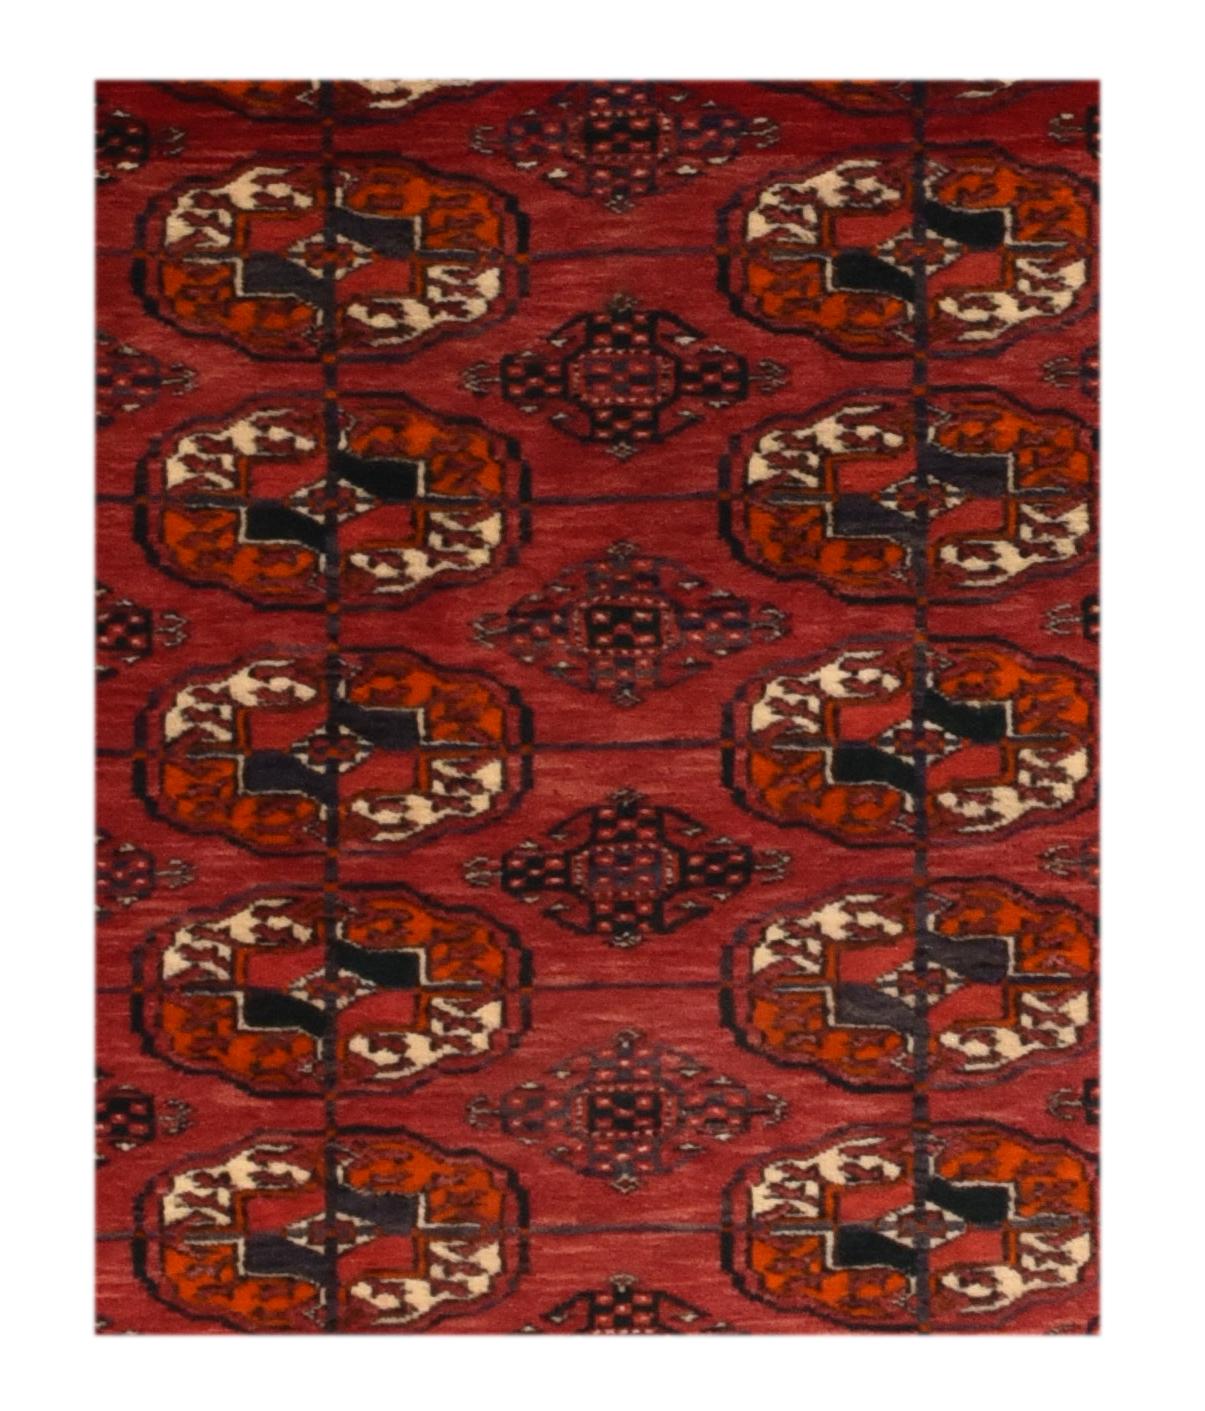 Alternative Titles: Bokhara rug, Bukharo rug
Bukhara rug, Bukhara also spelled Bokhara, Uzbek Bukharo, name erroneously given to floorcoverings made by various Turkmen tribes. The city of Bukhara, Uzbekistan, became prominent as a seat of Islamic